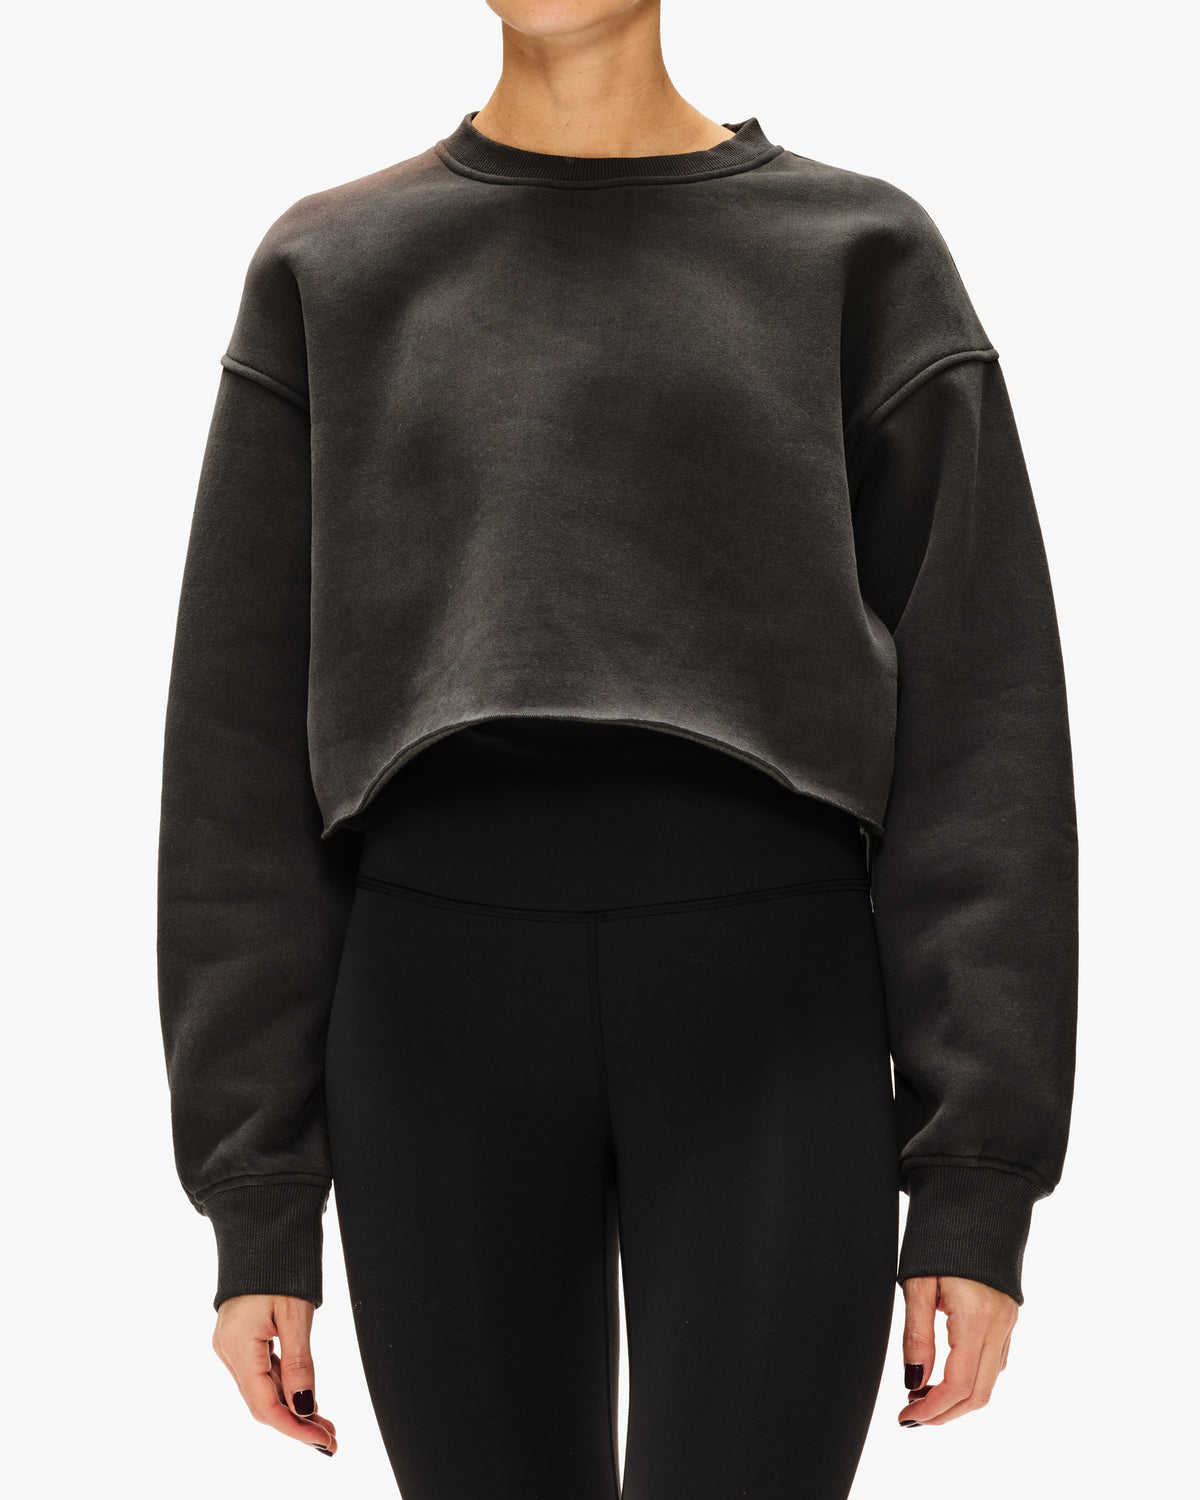 All Fenix Spencer Cropped Crew